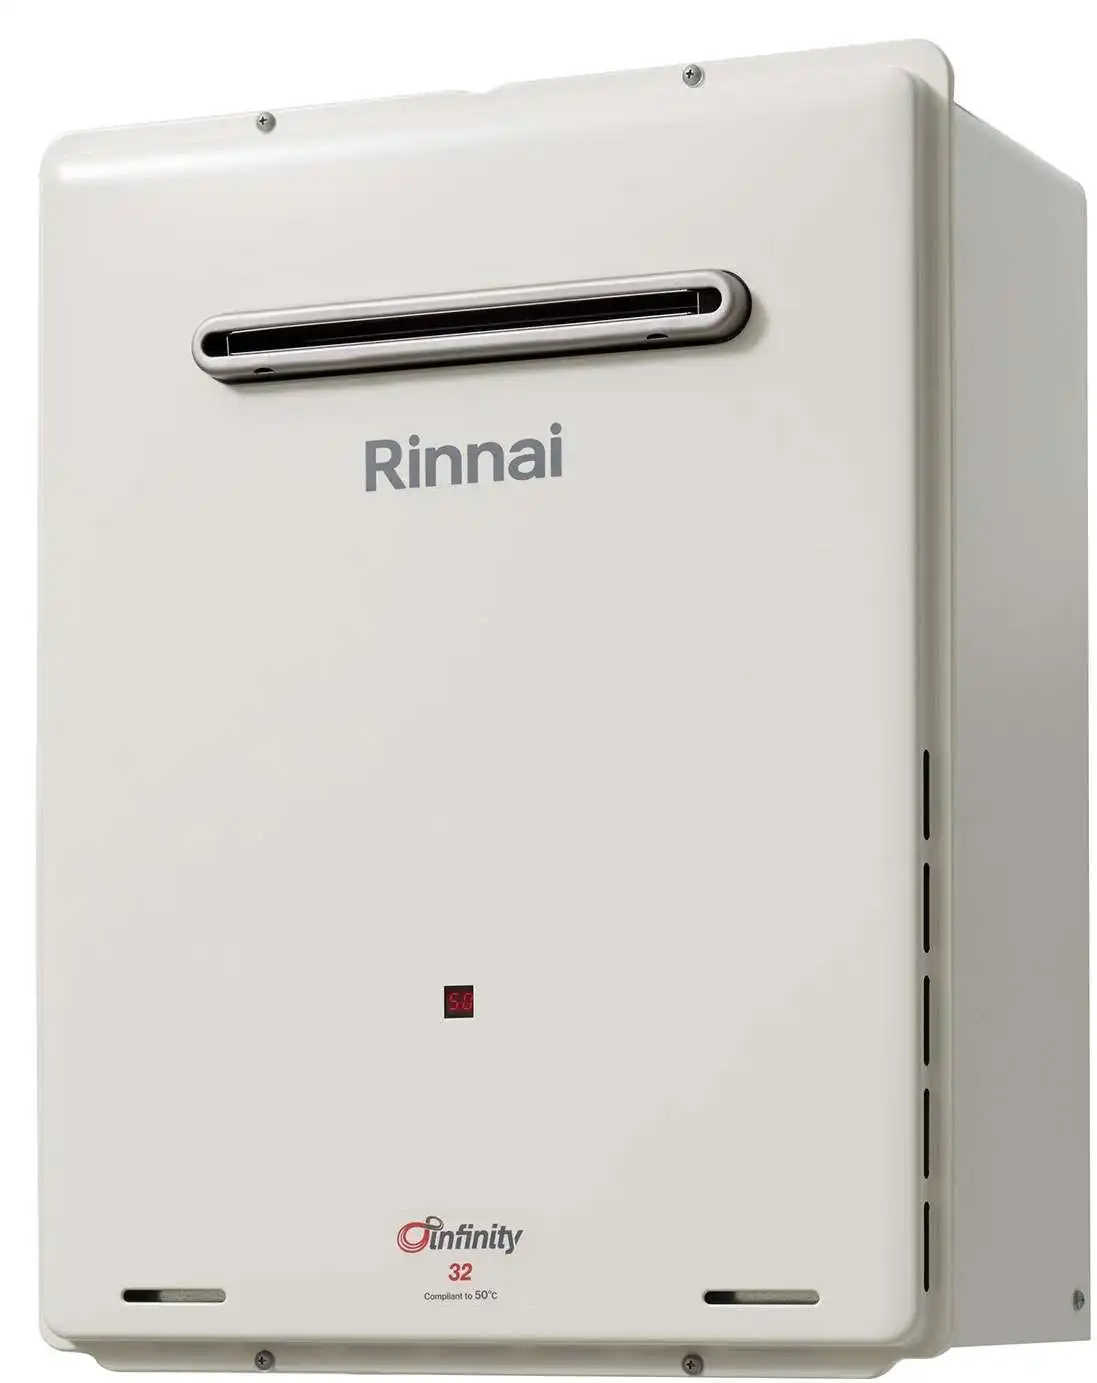 Rinnai Infinity 60oC 32L Instant Hot Water System INF32N60MA *NATURAL GAS*